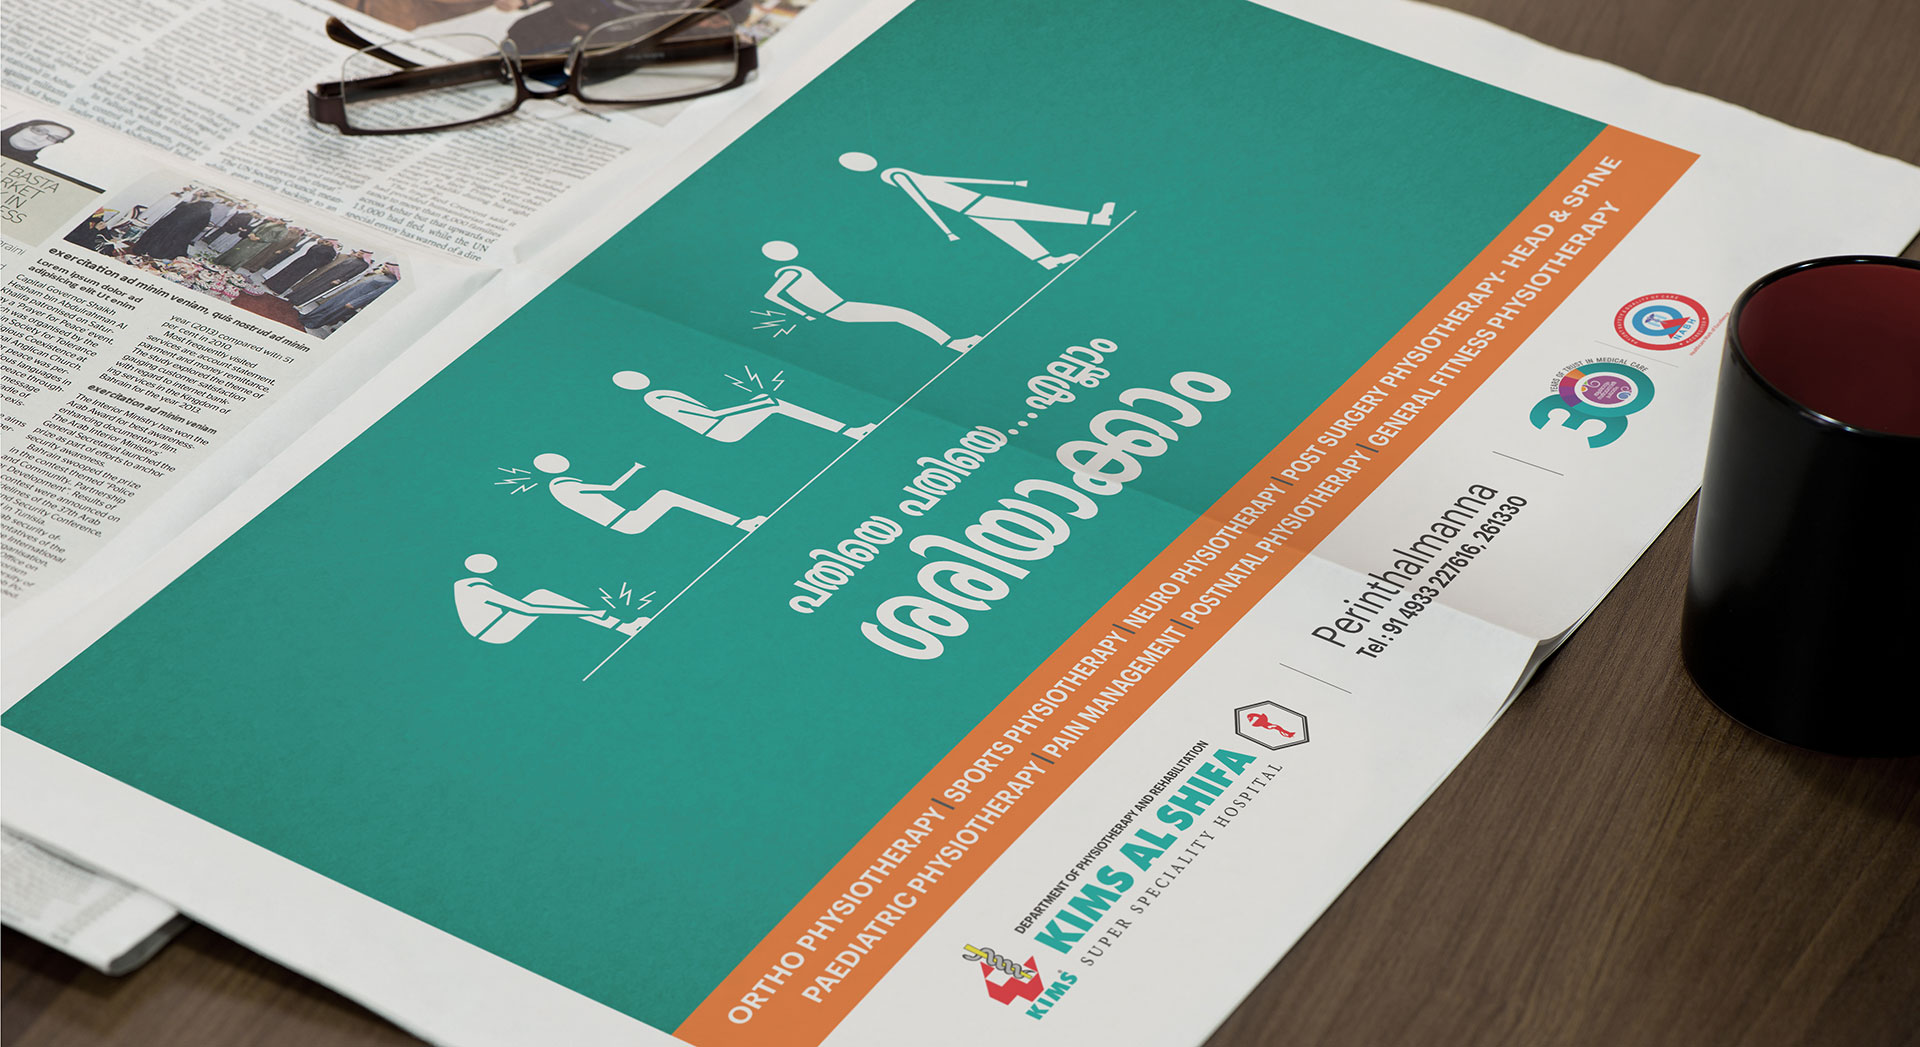 KIMS Al Shifa Hospital - Physiotherapy Department advertisement on newspaper